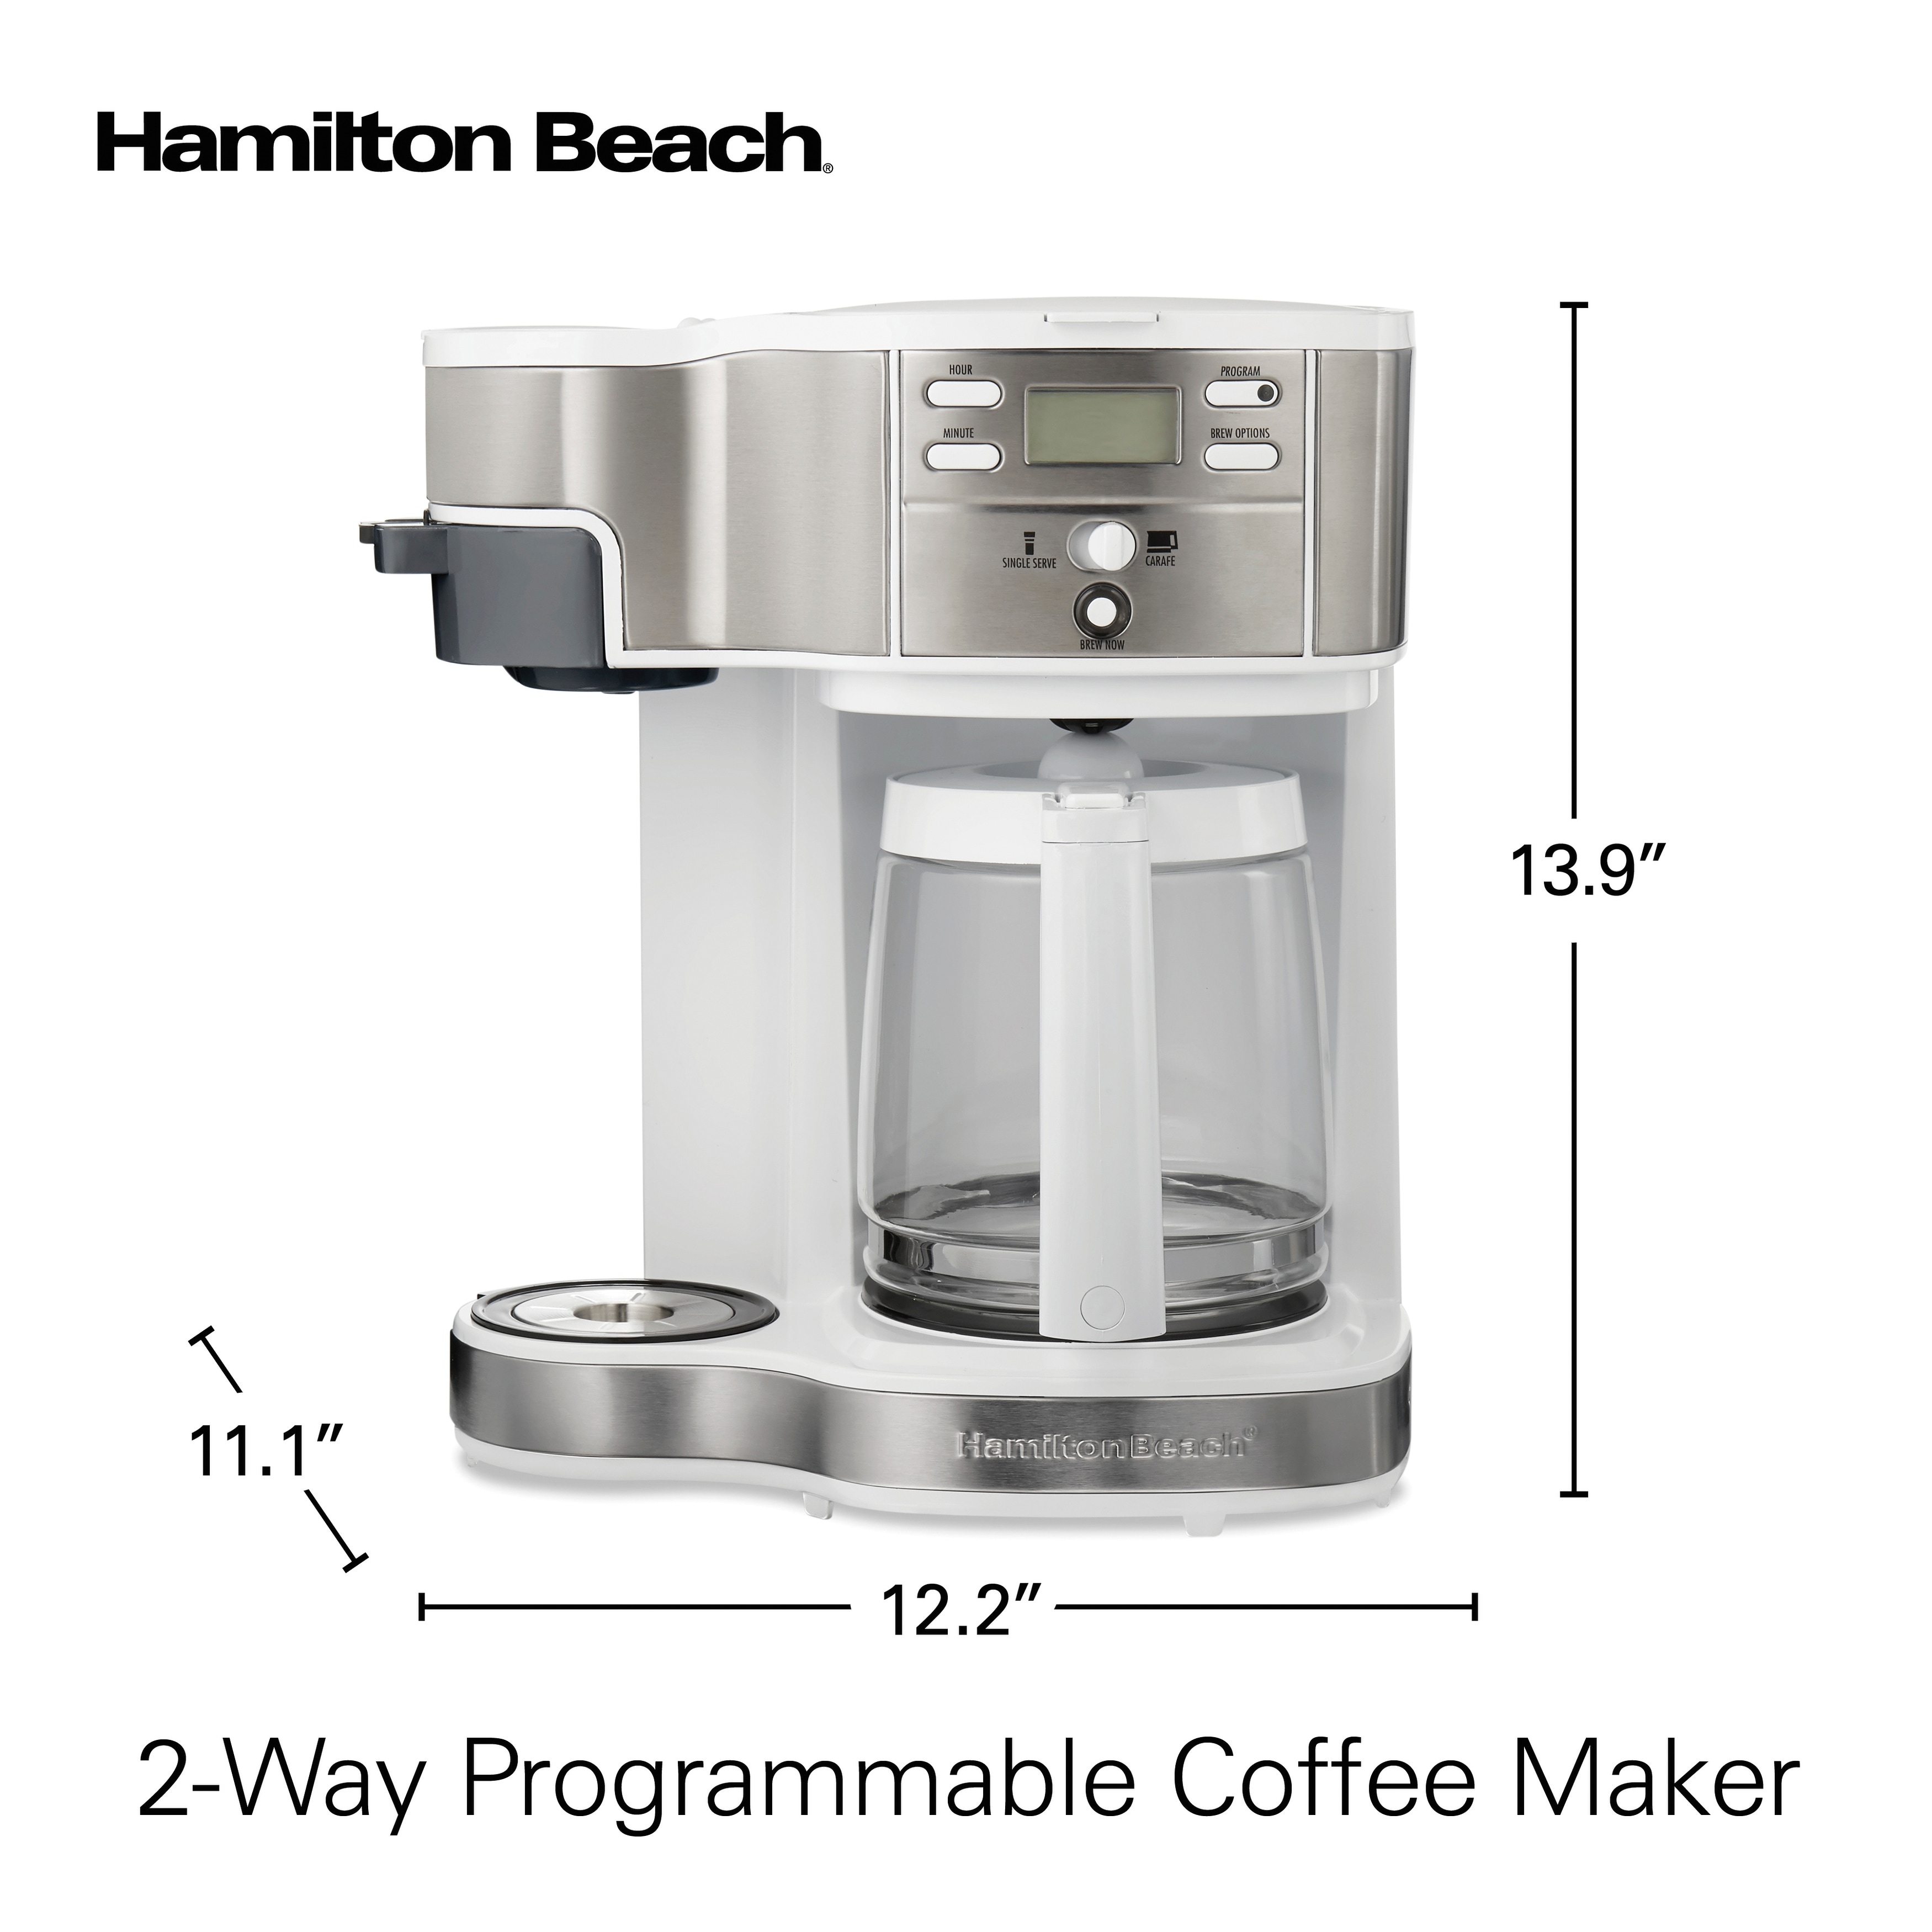 https://ak1.ostkcdn.com/images/products/is/images/direct/f7451bbad97121a945bef862a01776db520ced82/Hamilton-Beach-2-Way-Programmable-Coffee-Maker%2C.jpg